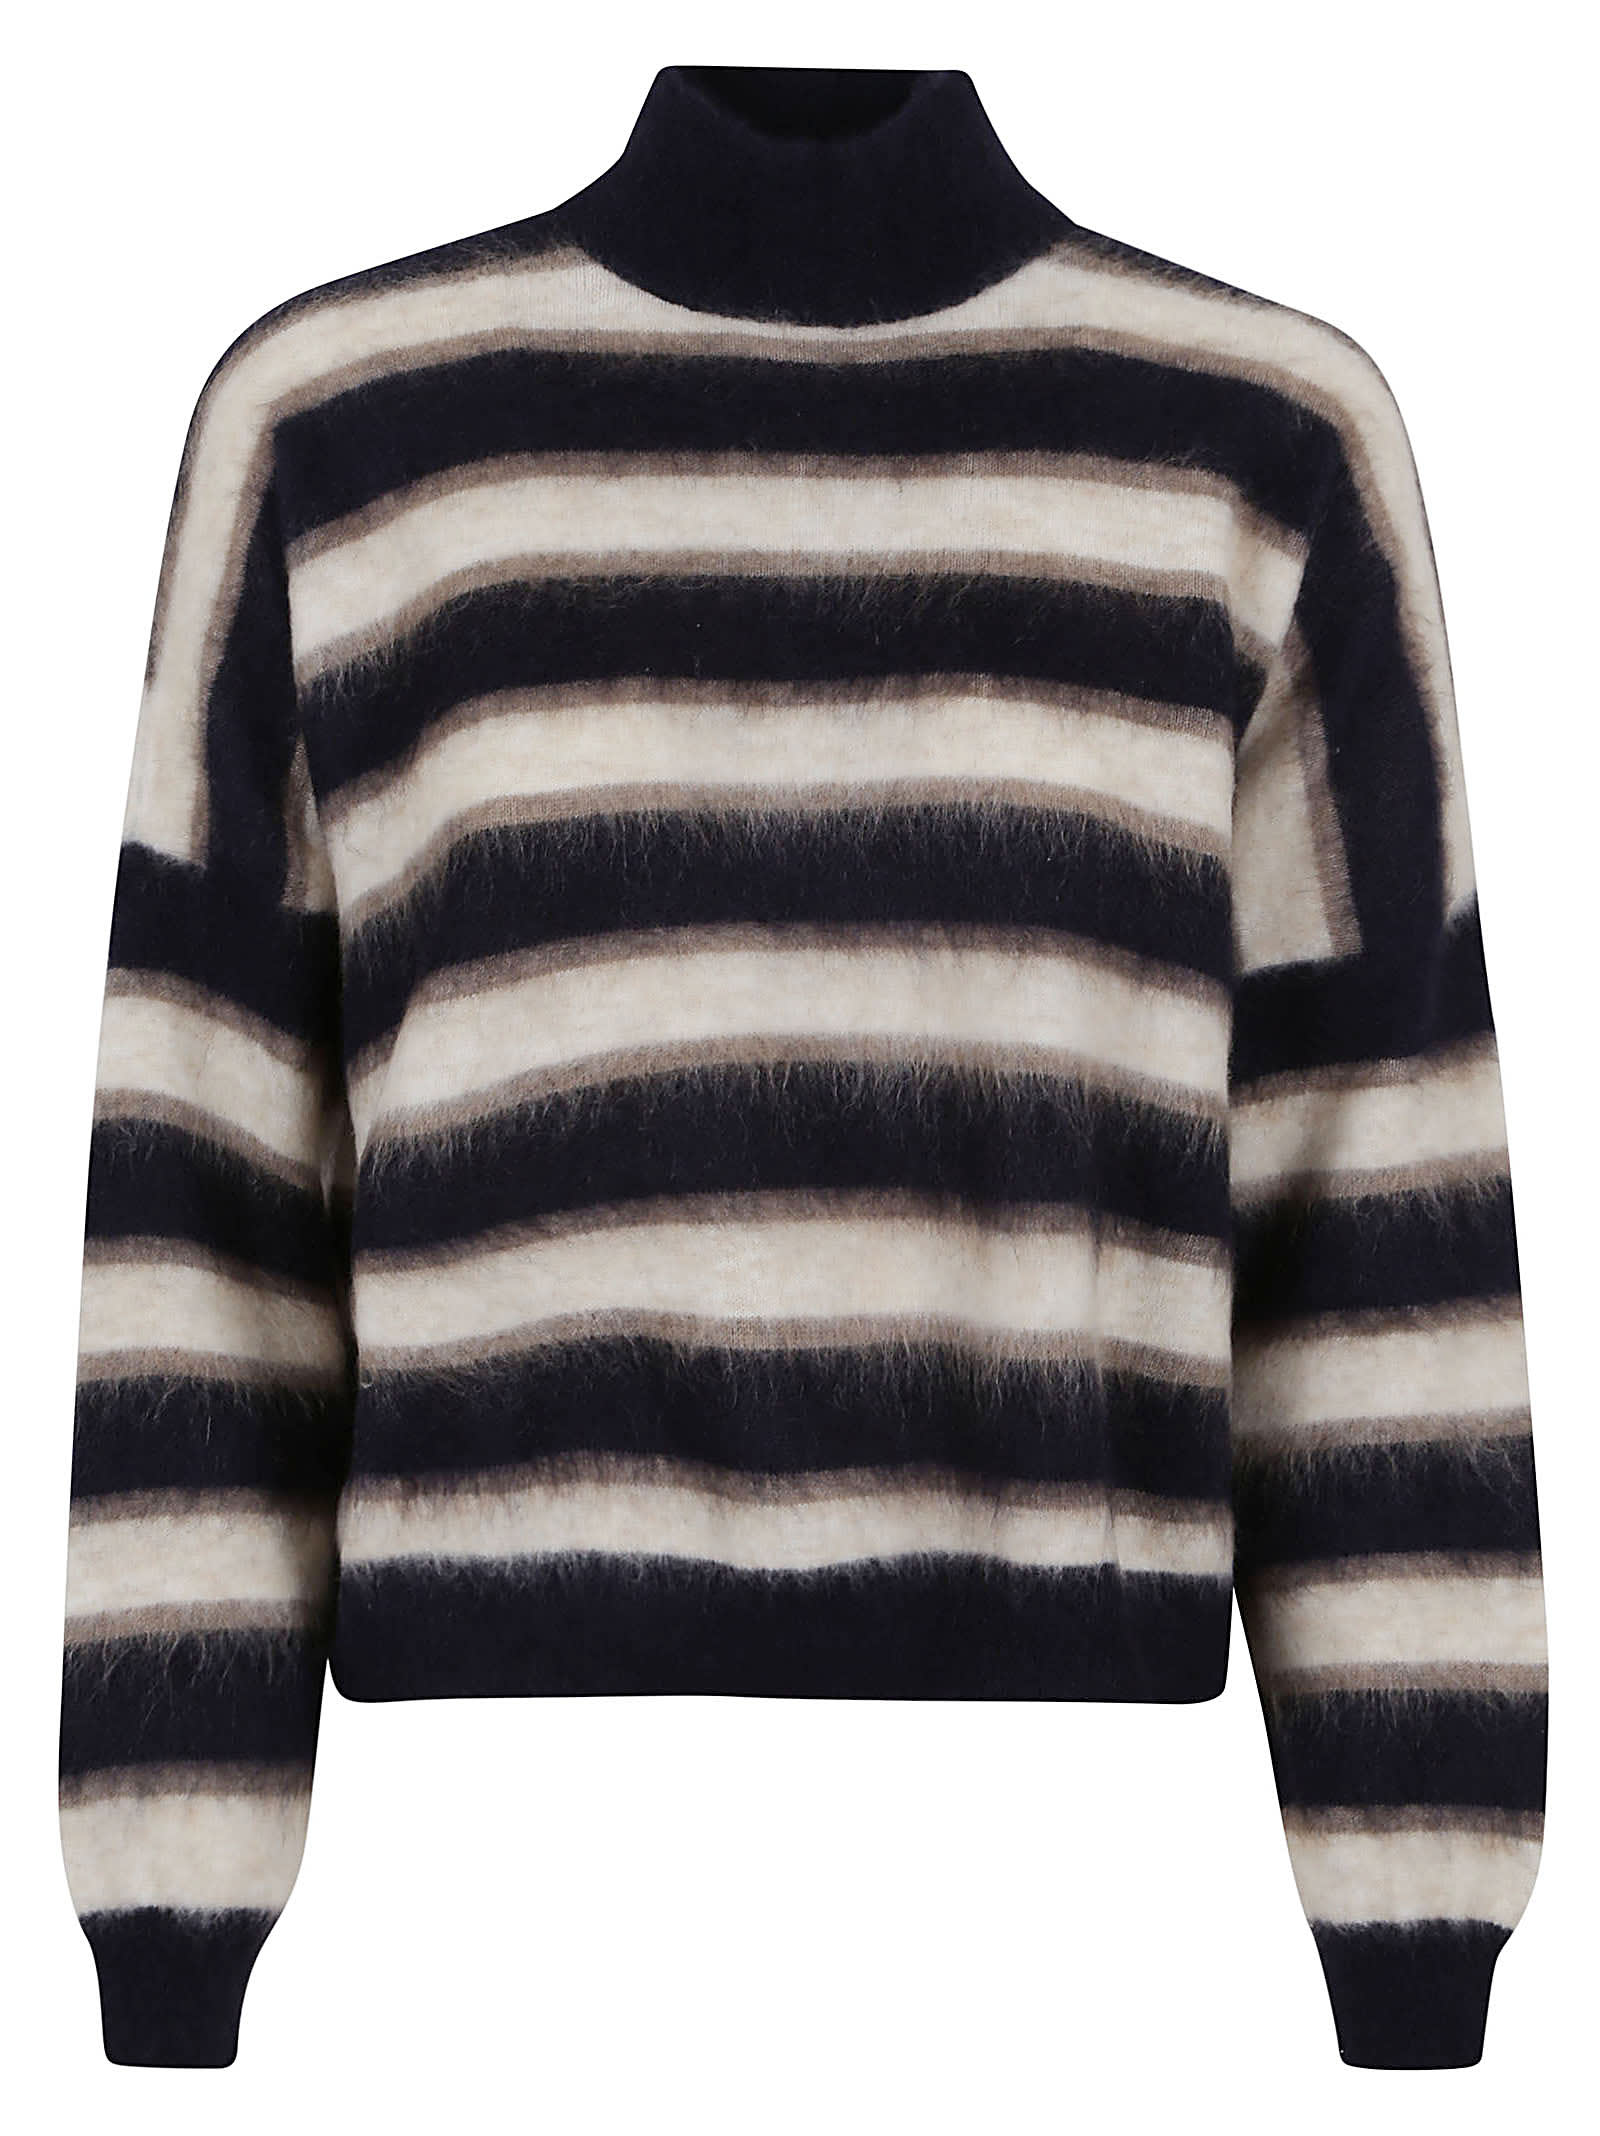 BRUNELLO CUCINELLI LONG-SLEEVED TURTLENECK SWEATER WITH SPECIAL STRIPED PATTERN IN SOFT MOHAIR, WOOL AND CASHMERE YARN